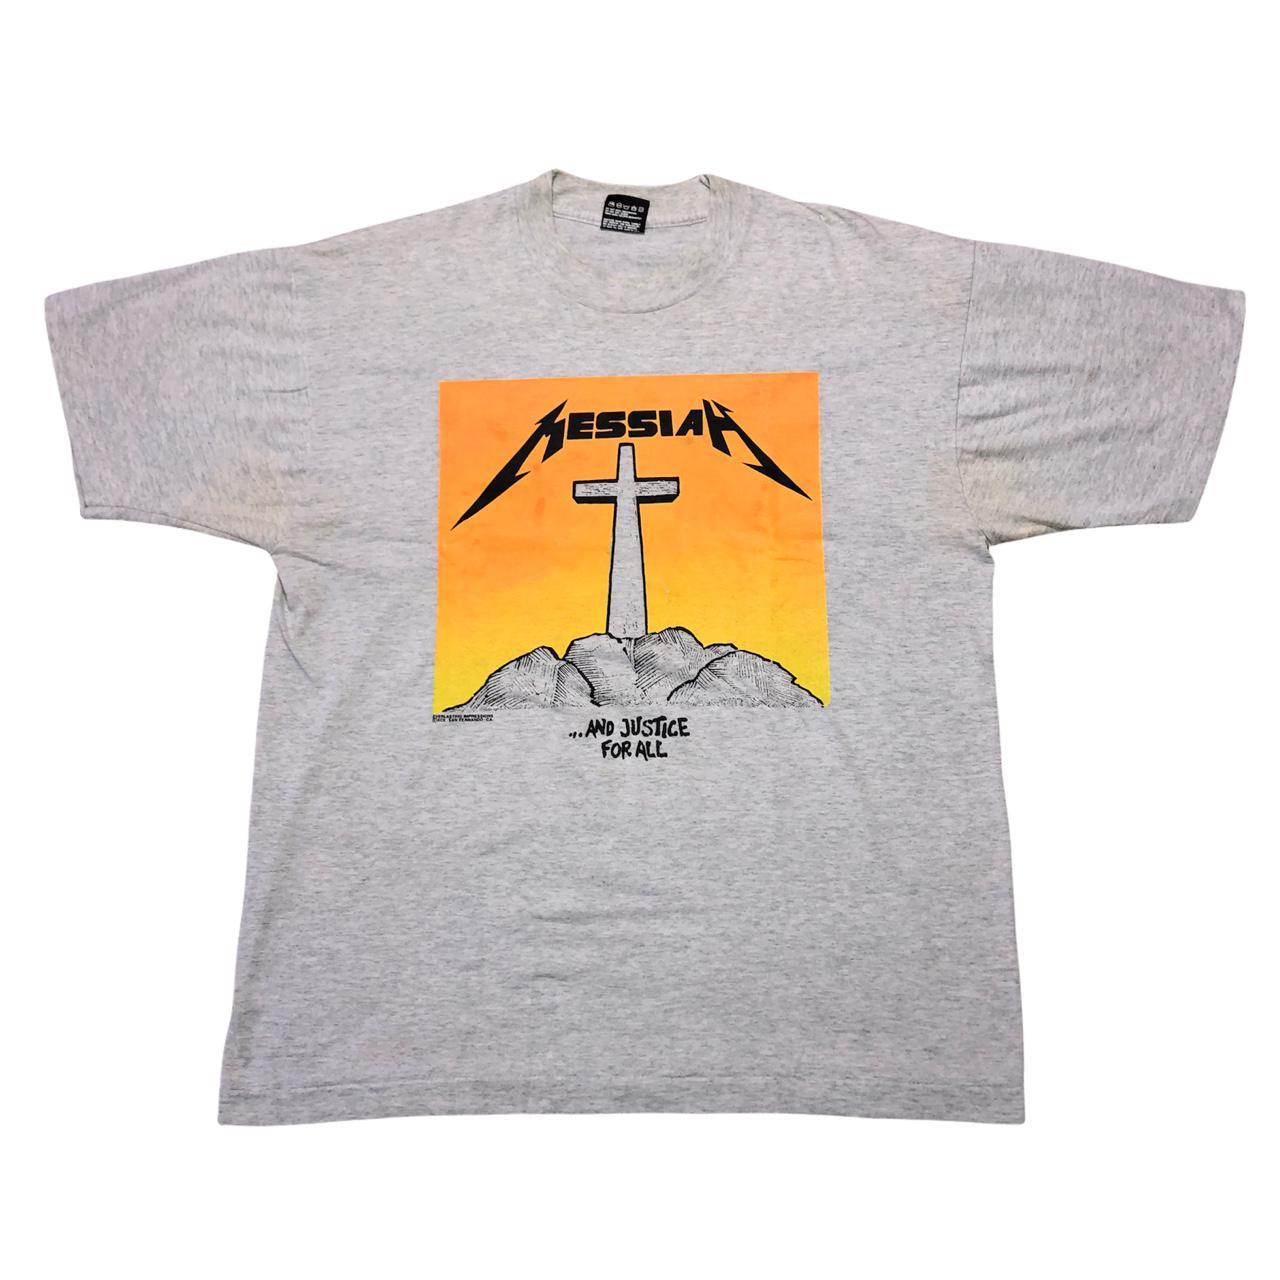 Product Image 1 - Vintage Messiah And Justice For